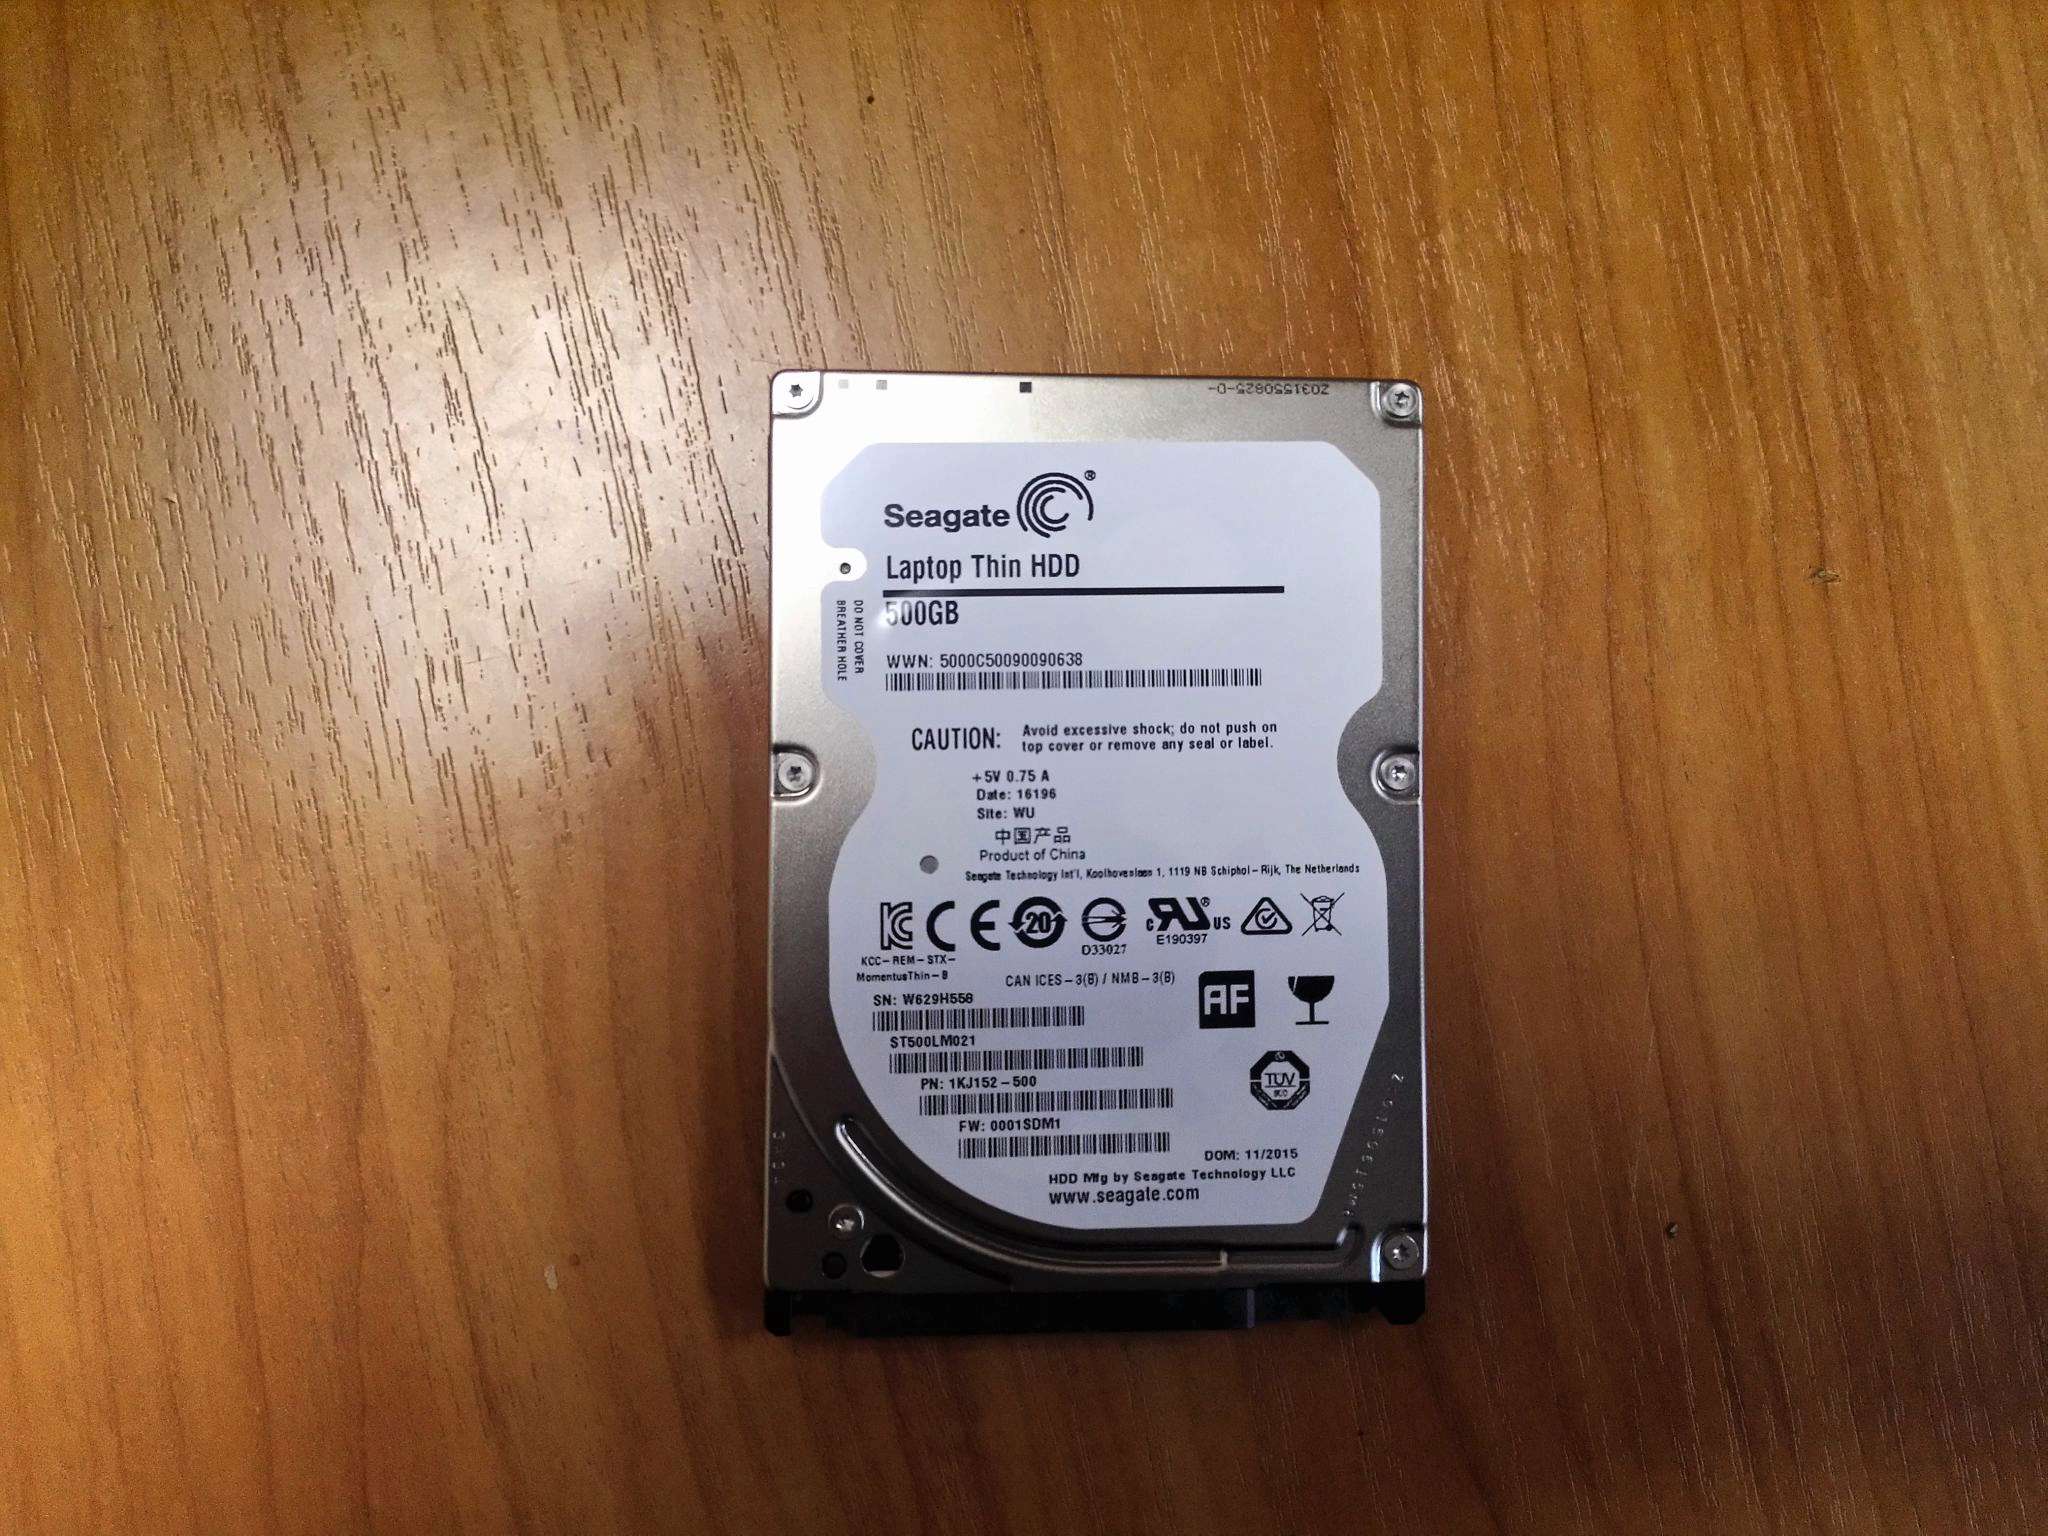 Laptop thin HDD 500 GB Seagate st500lm021